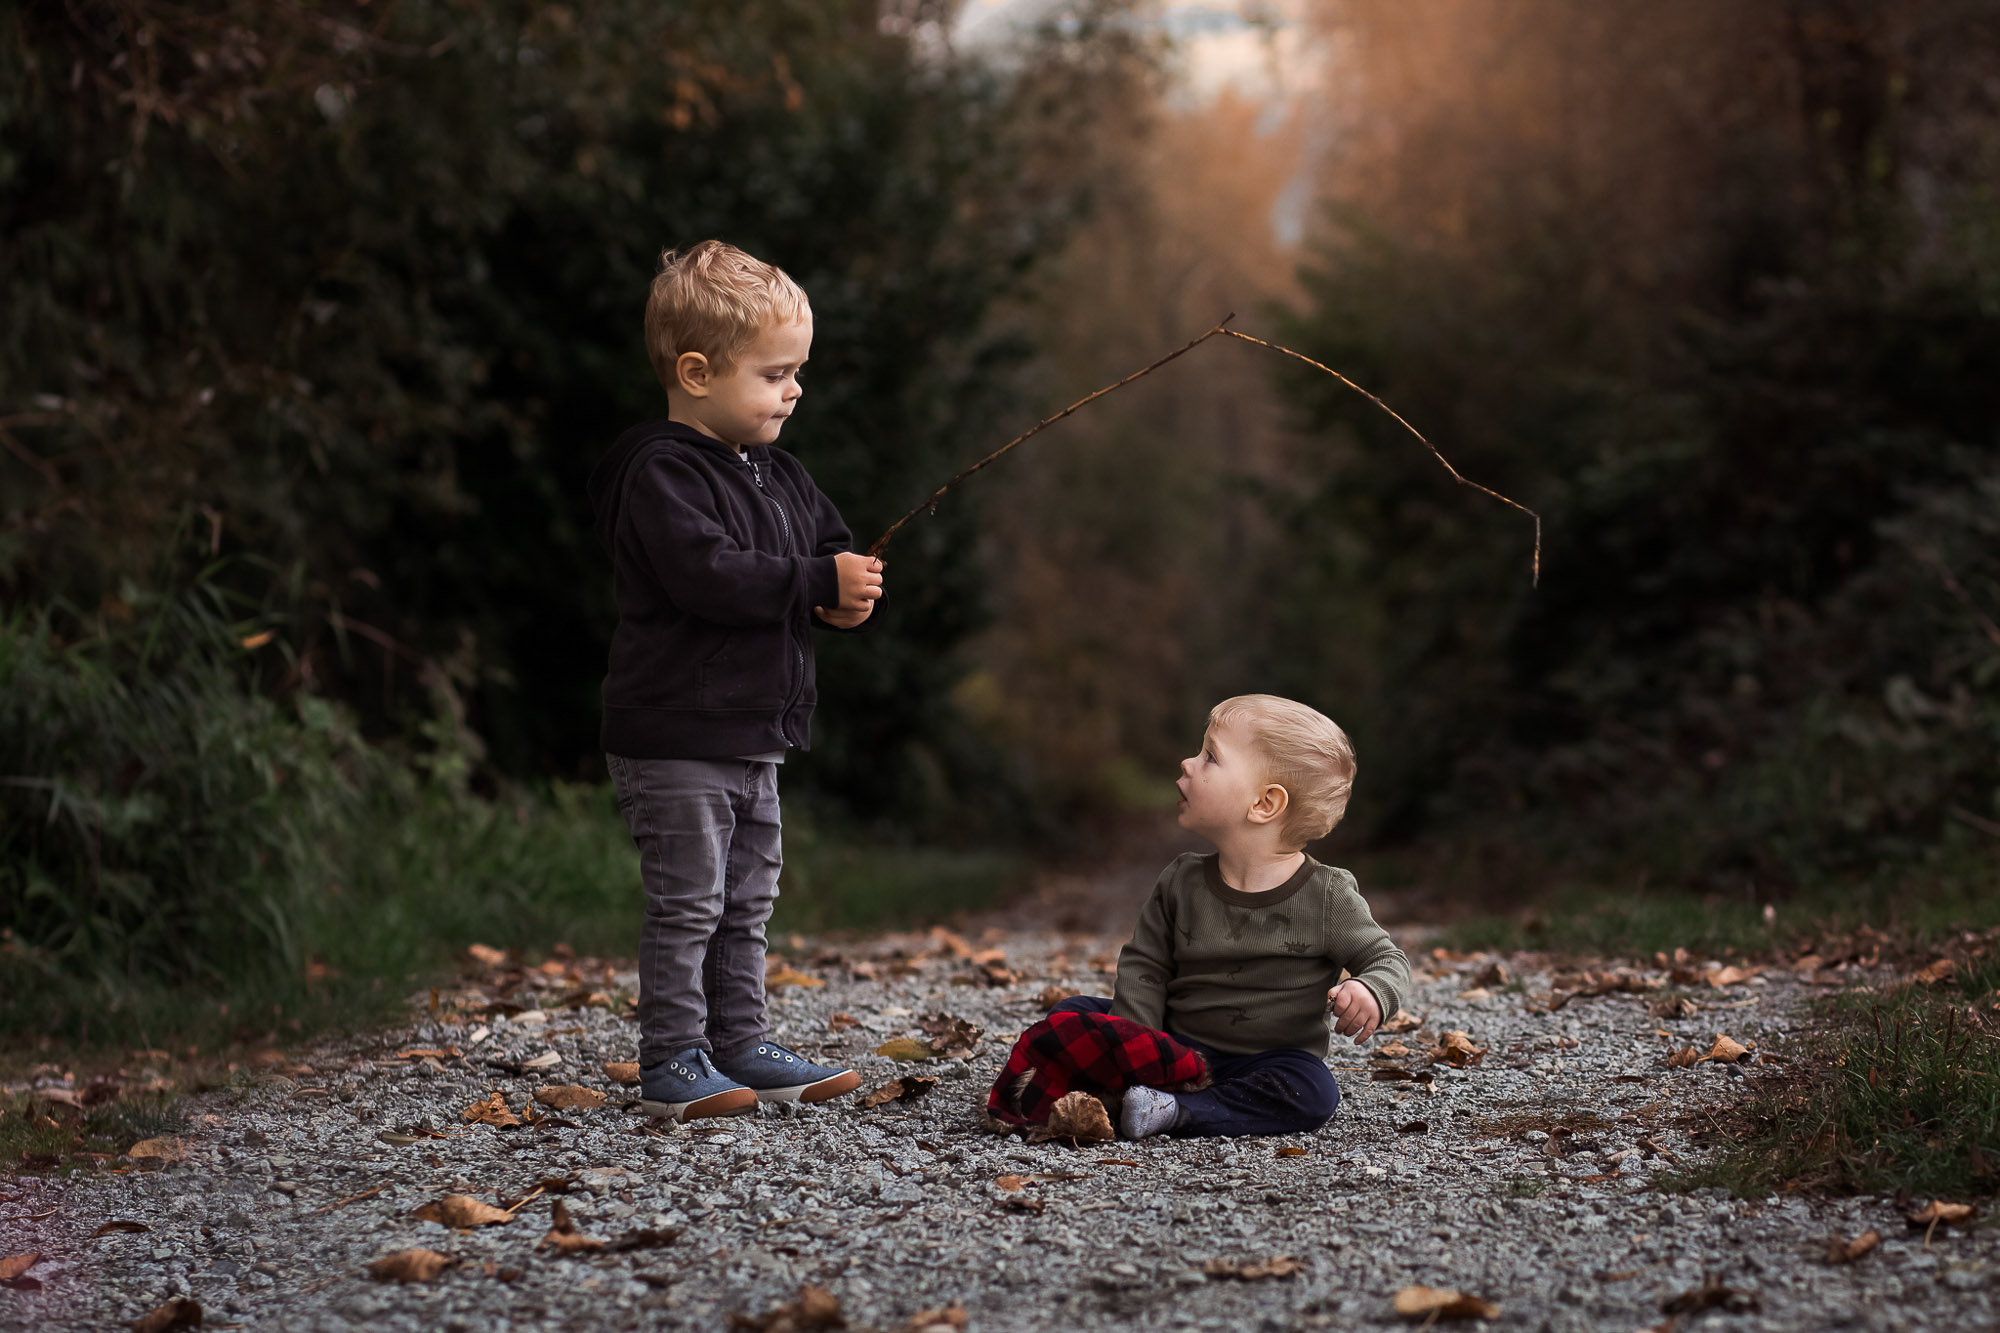 Children playing in nature